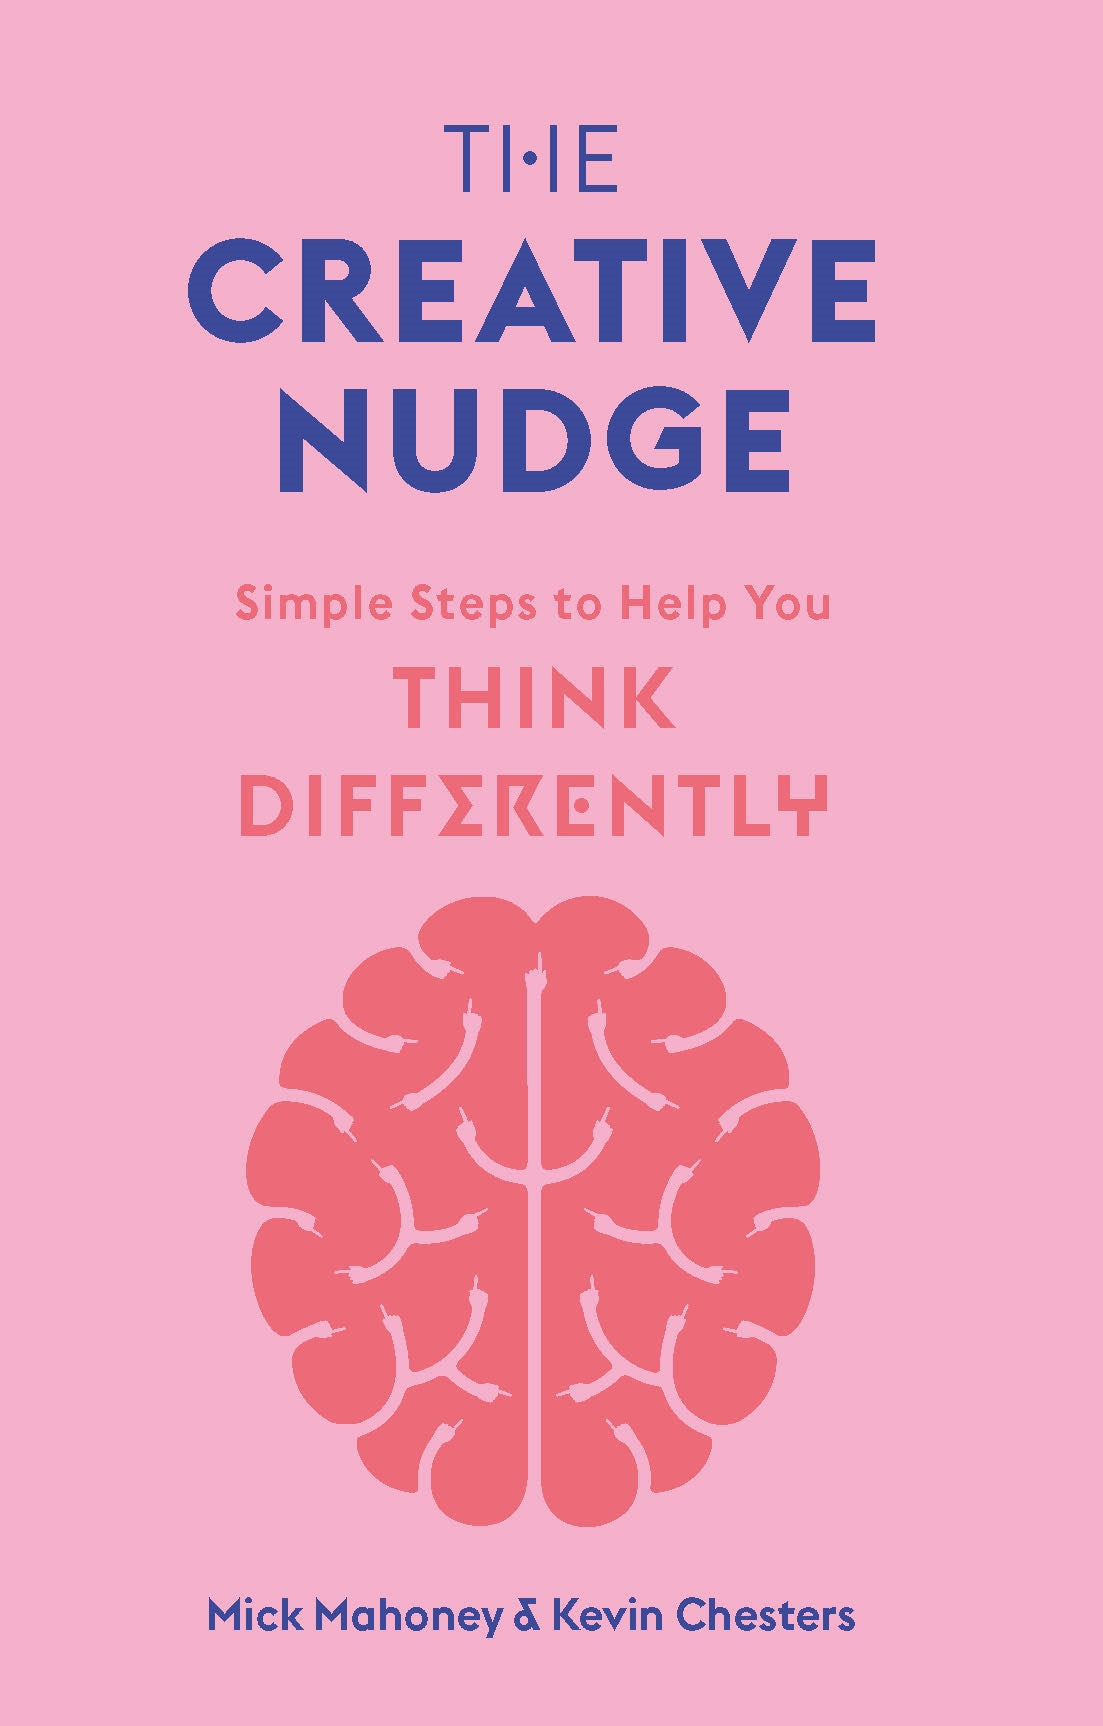 The Creative Nudge by Kevin Chesters, Mick Mahoney